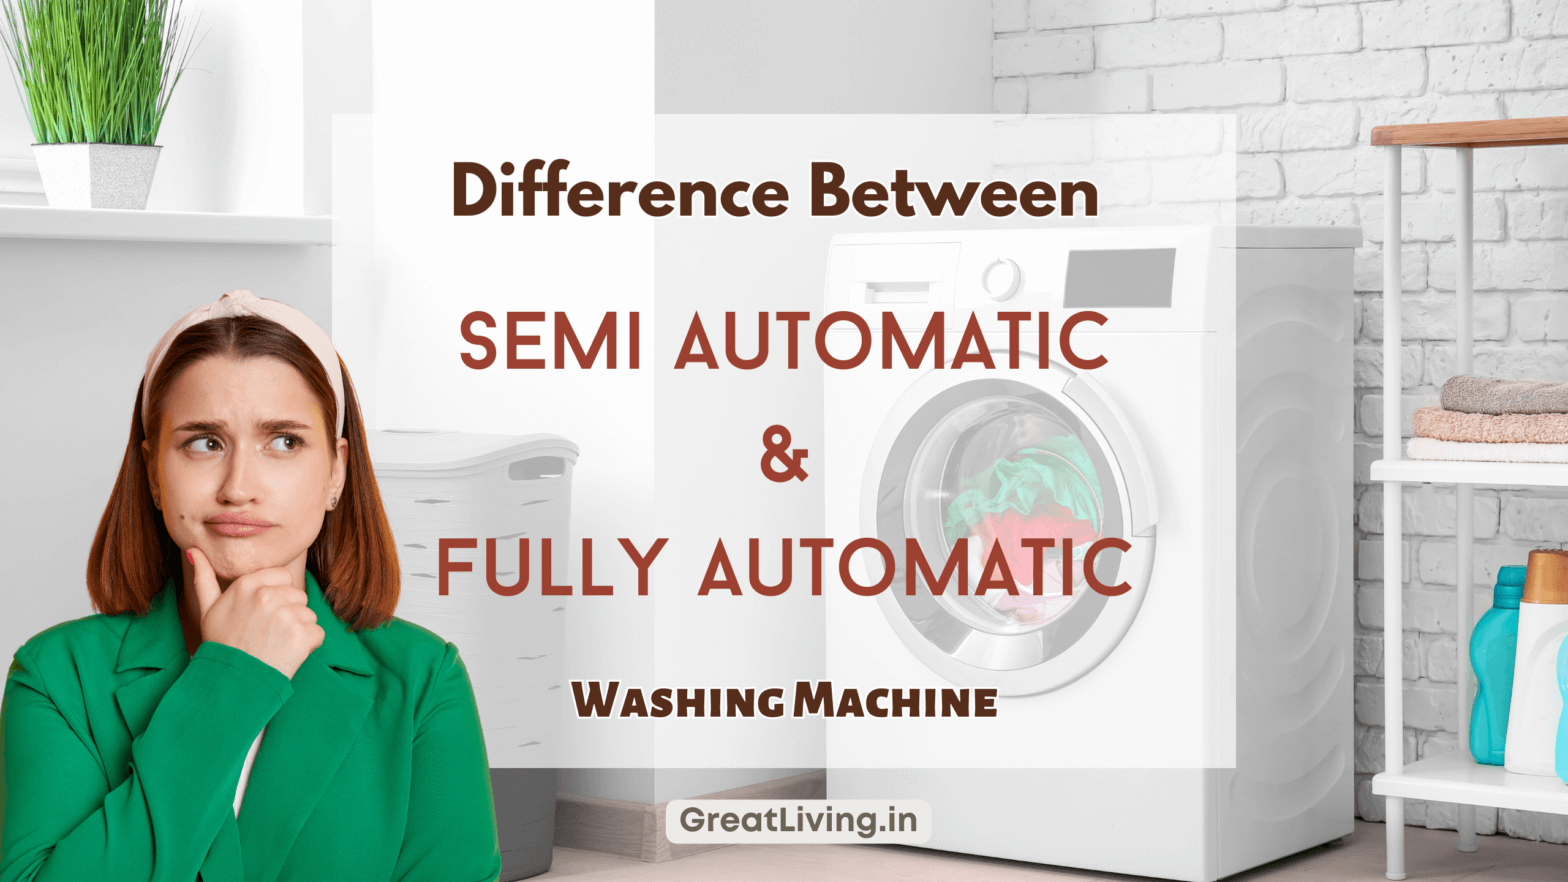 Difference Between Semi Automatic and Fully Automatic Washing Machine